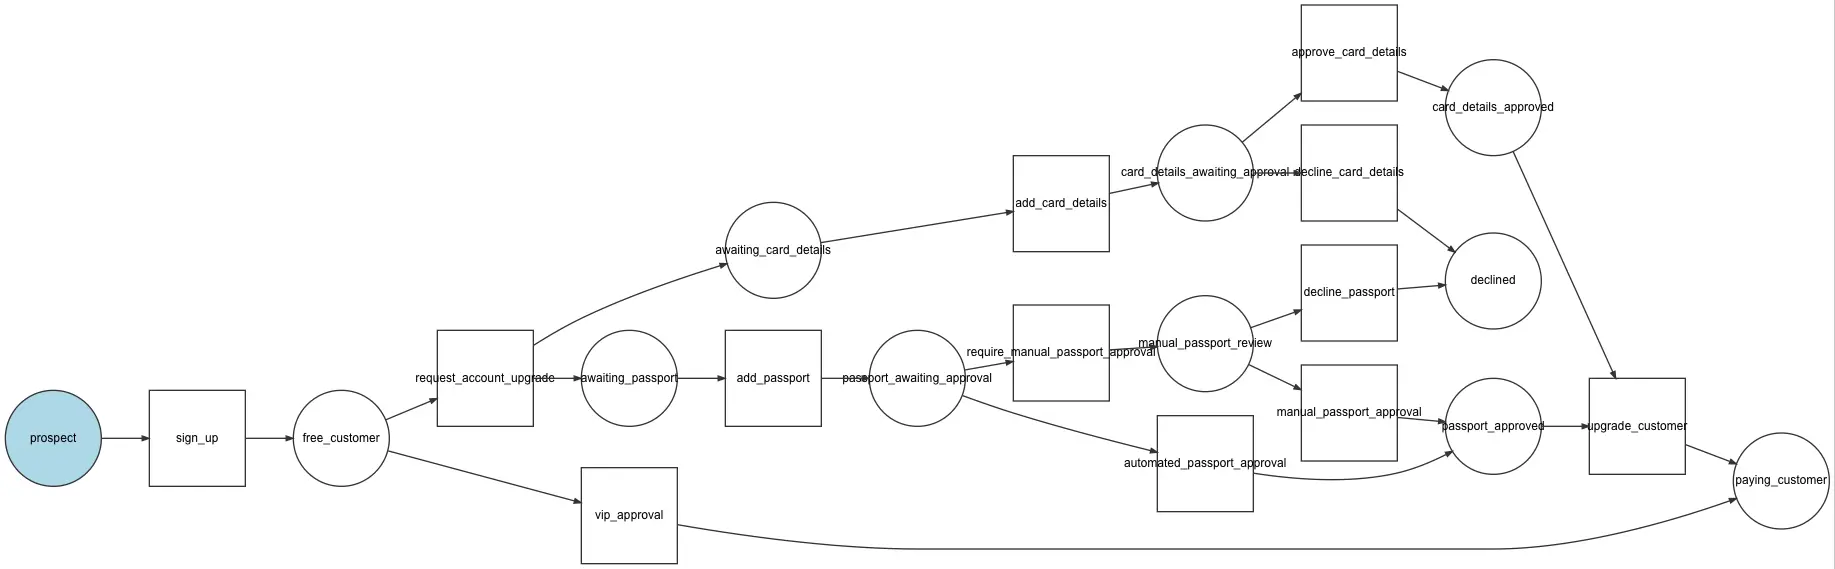 codereview videos workflow diagram example